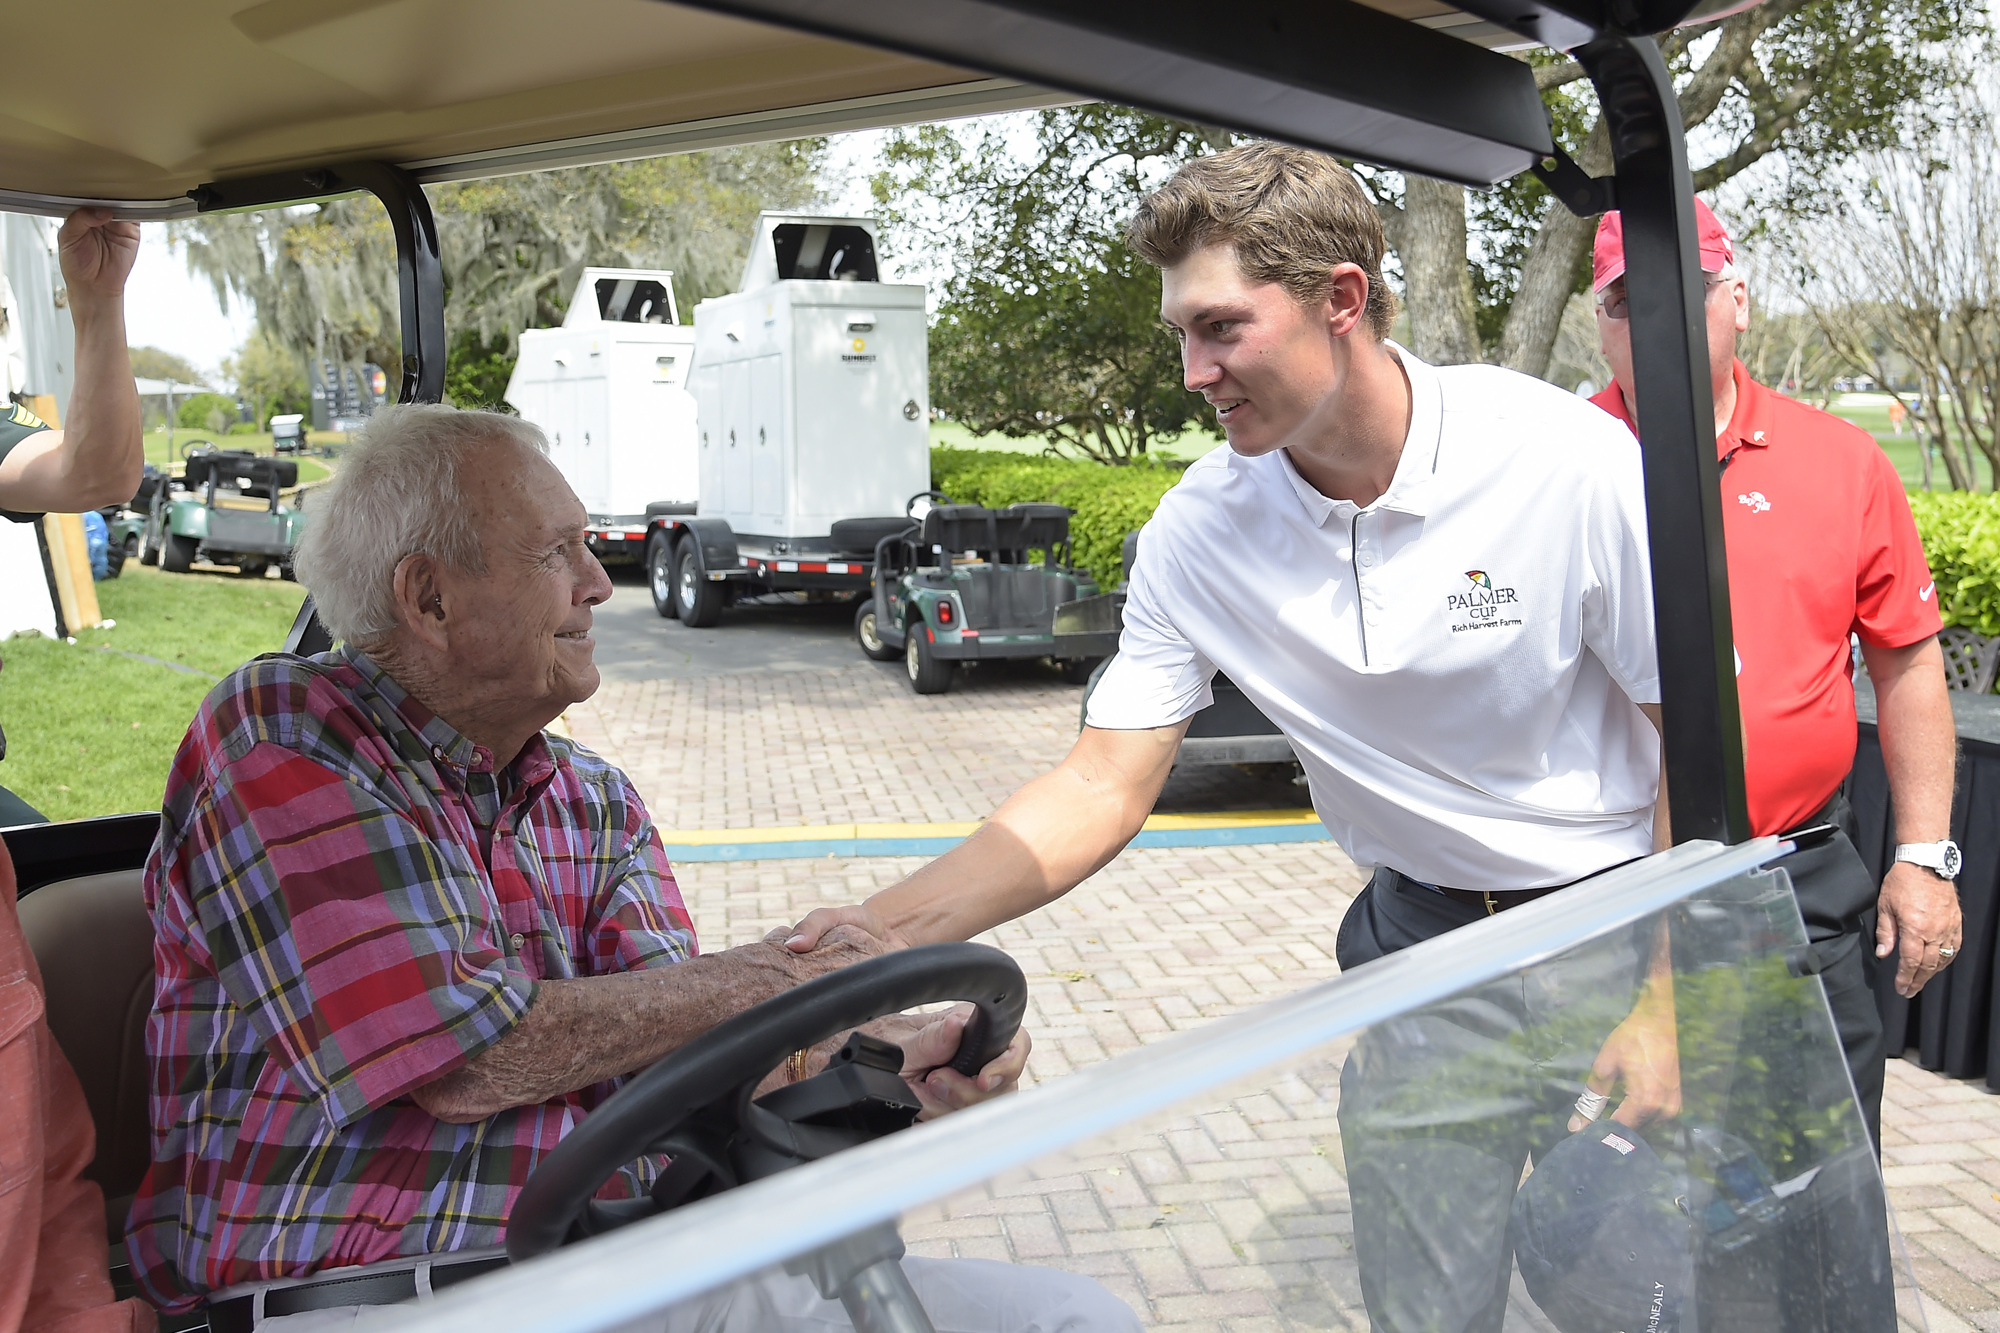 Arnold Palmer was known to ride his golf cart around the grounds at Bay Hill, greeting volunteers, fans and golfers.